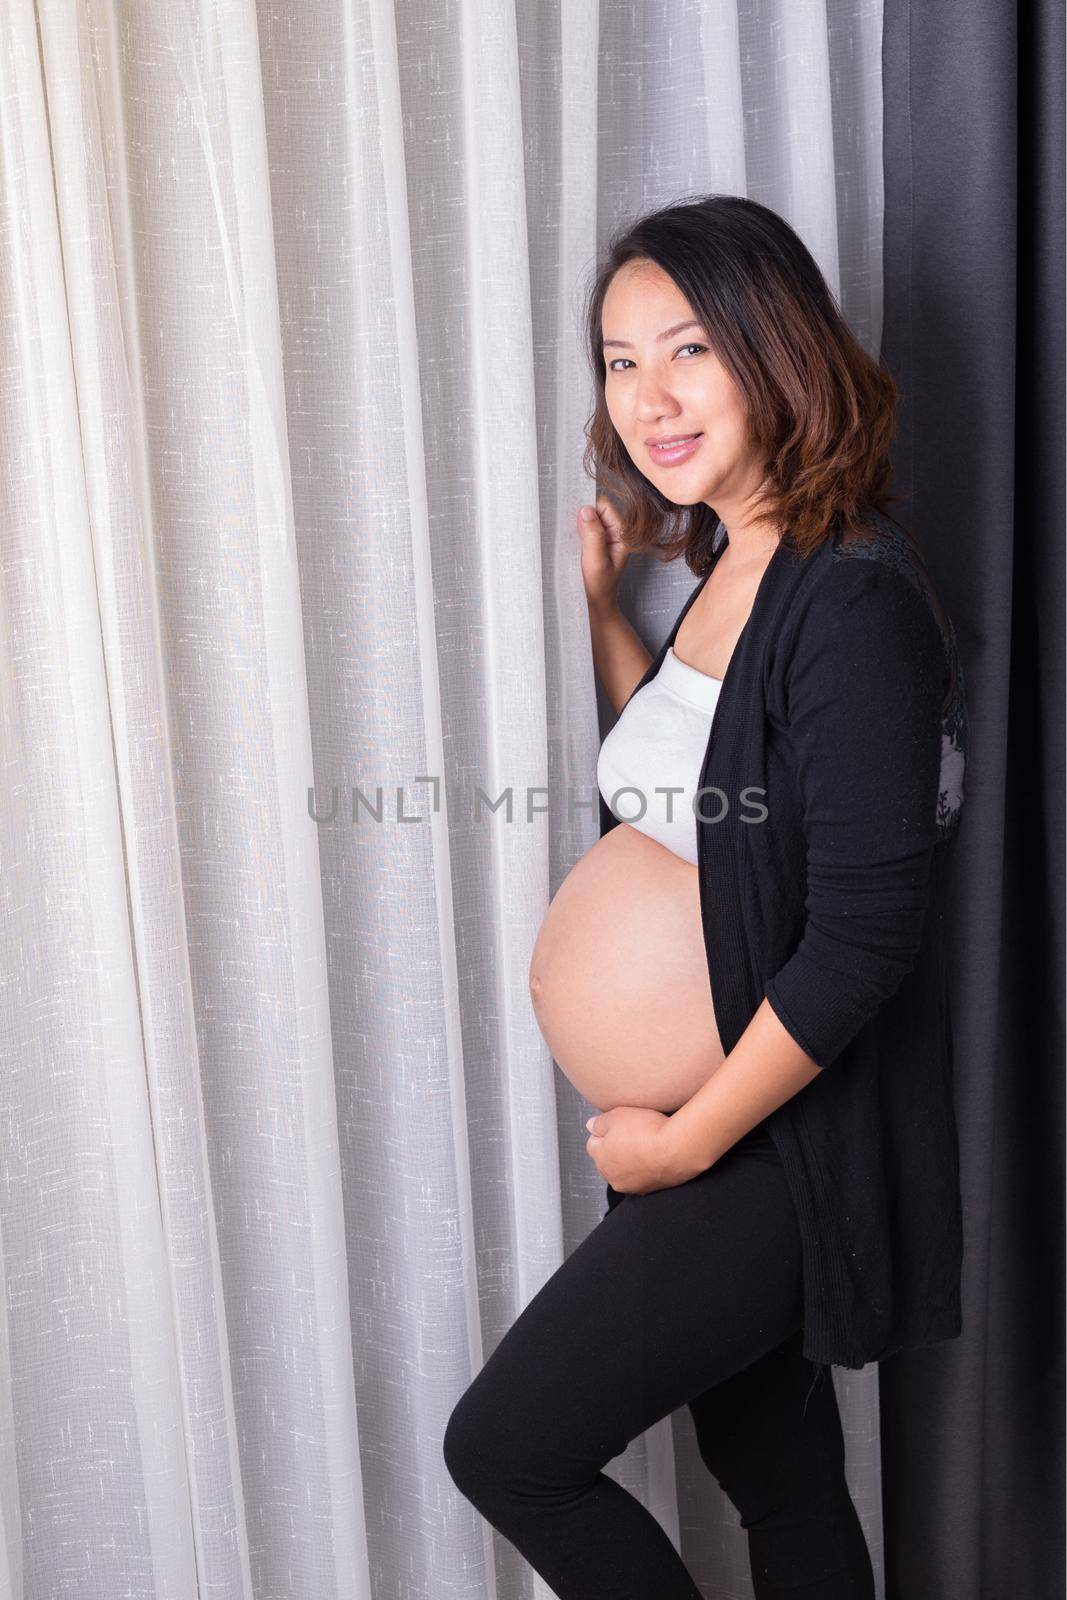 Pregnant woman standing near window in room